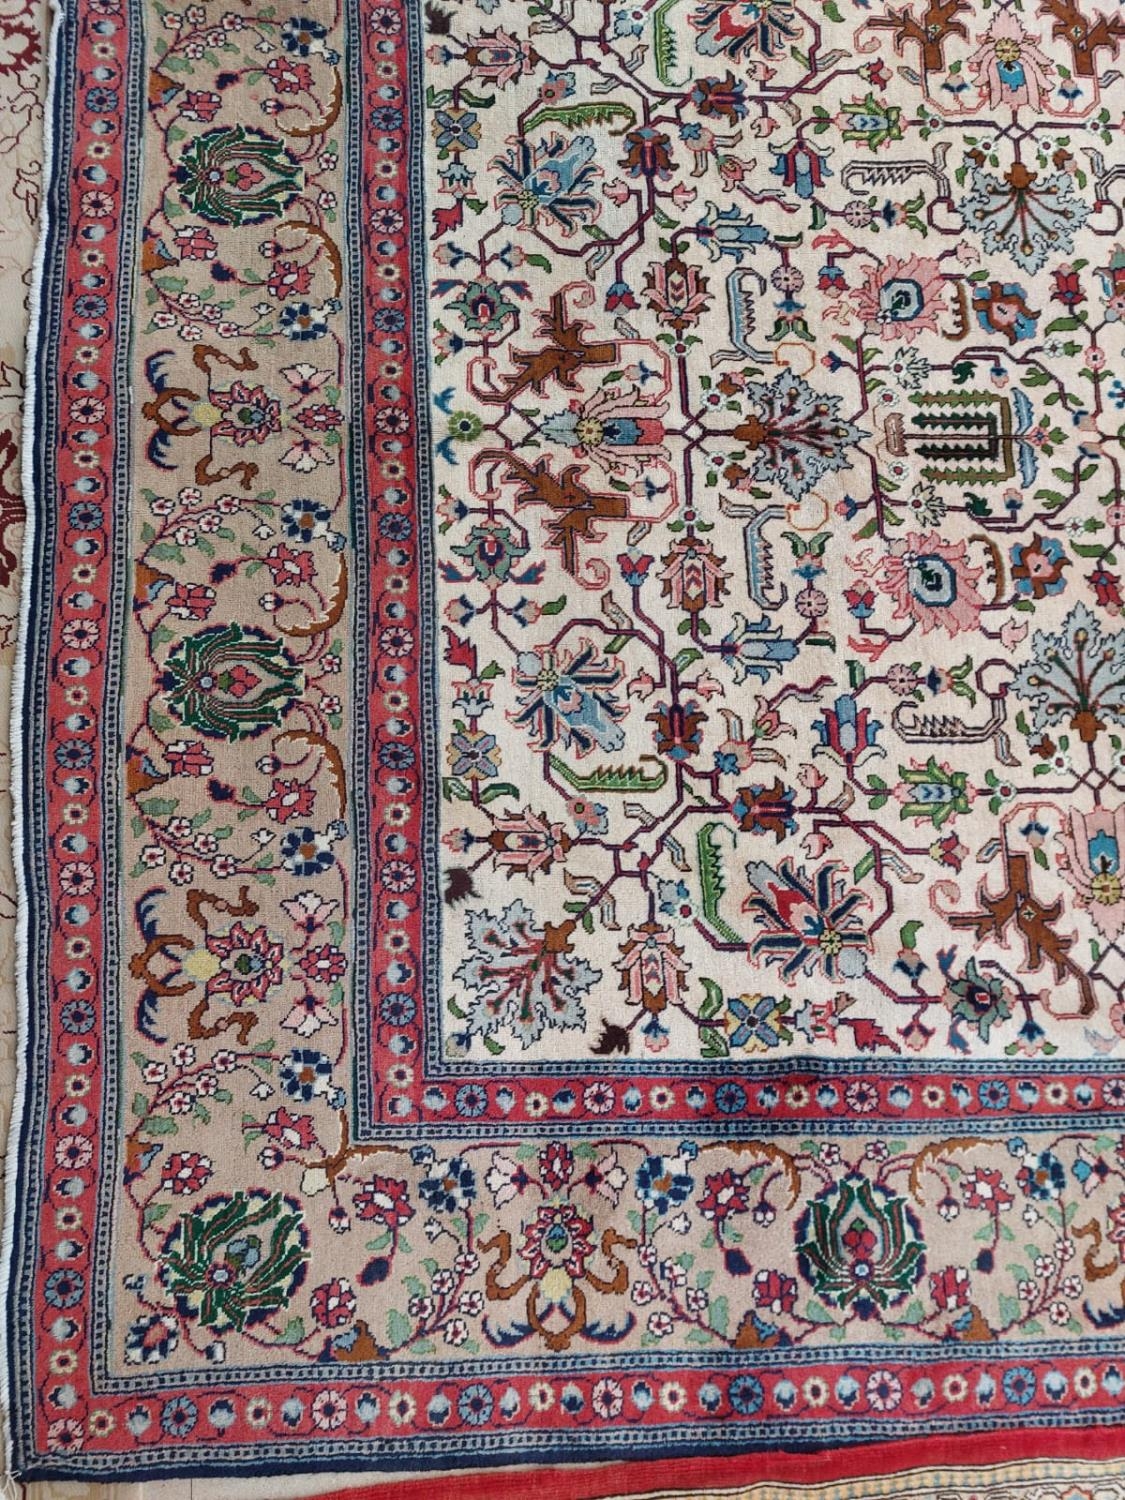 Fine Tabriz carpet, signed by Master Weaver Javan - Persia�Circa. 1930sSize. 3.20 x 2.28 metres - Image 2 of 4